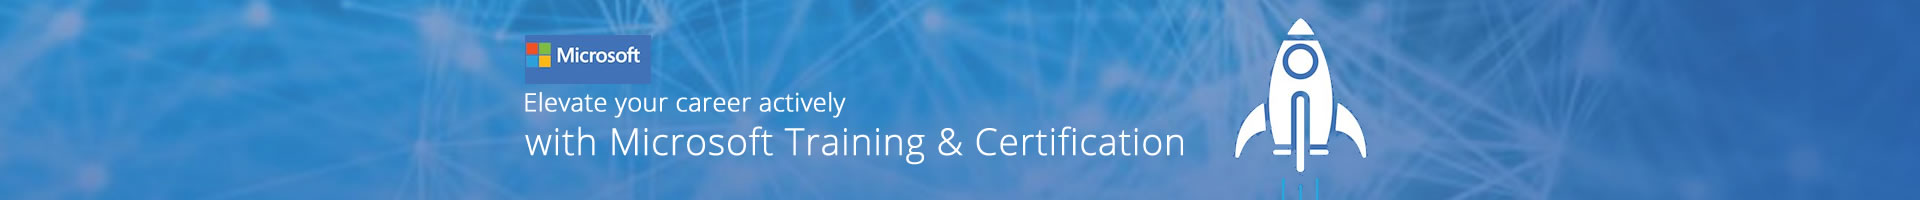 MCE: Azure Solution Expert Certification Boot Camp - 7 Days @ 2750. Microsoft Cloud Certificaiton Boot Camp at San Mateo, California, Maryland, Baltimore. MCE Boot camp, MCE Certification, MCE Training, MCE Online Boot Camp, MCE Online Training, MCE Online Certification